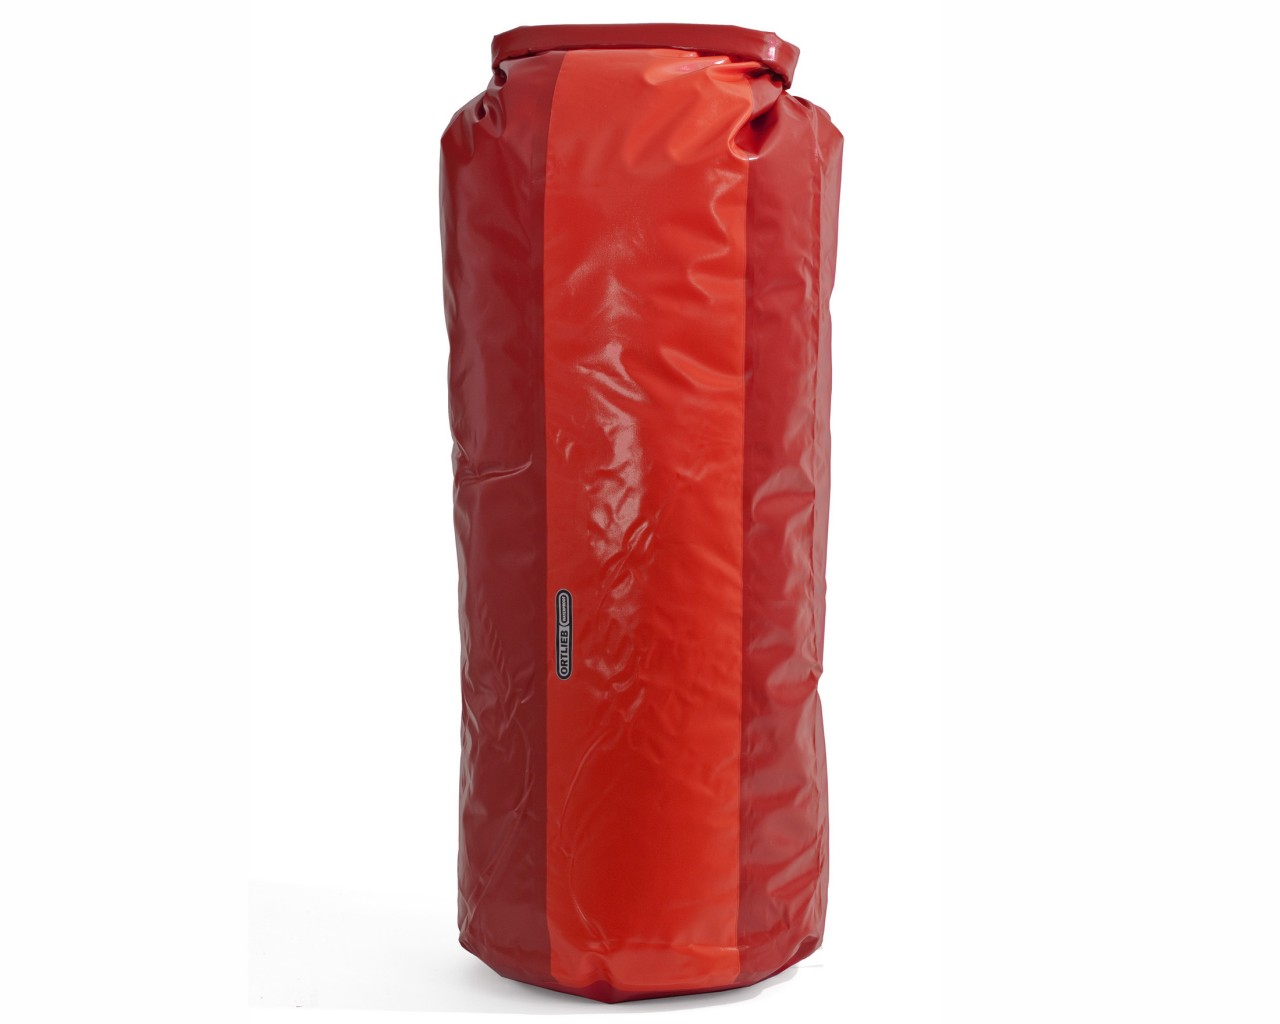 Ortlieb dry bag PD350 - 79 liter | cranberry-signal red